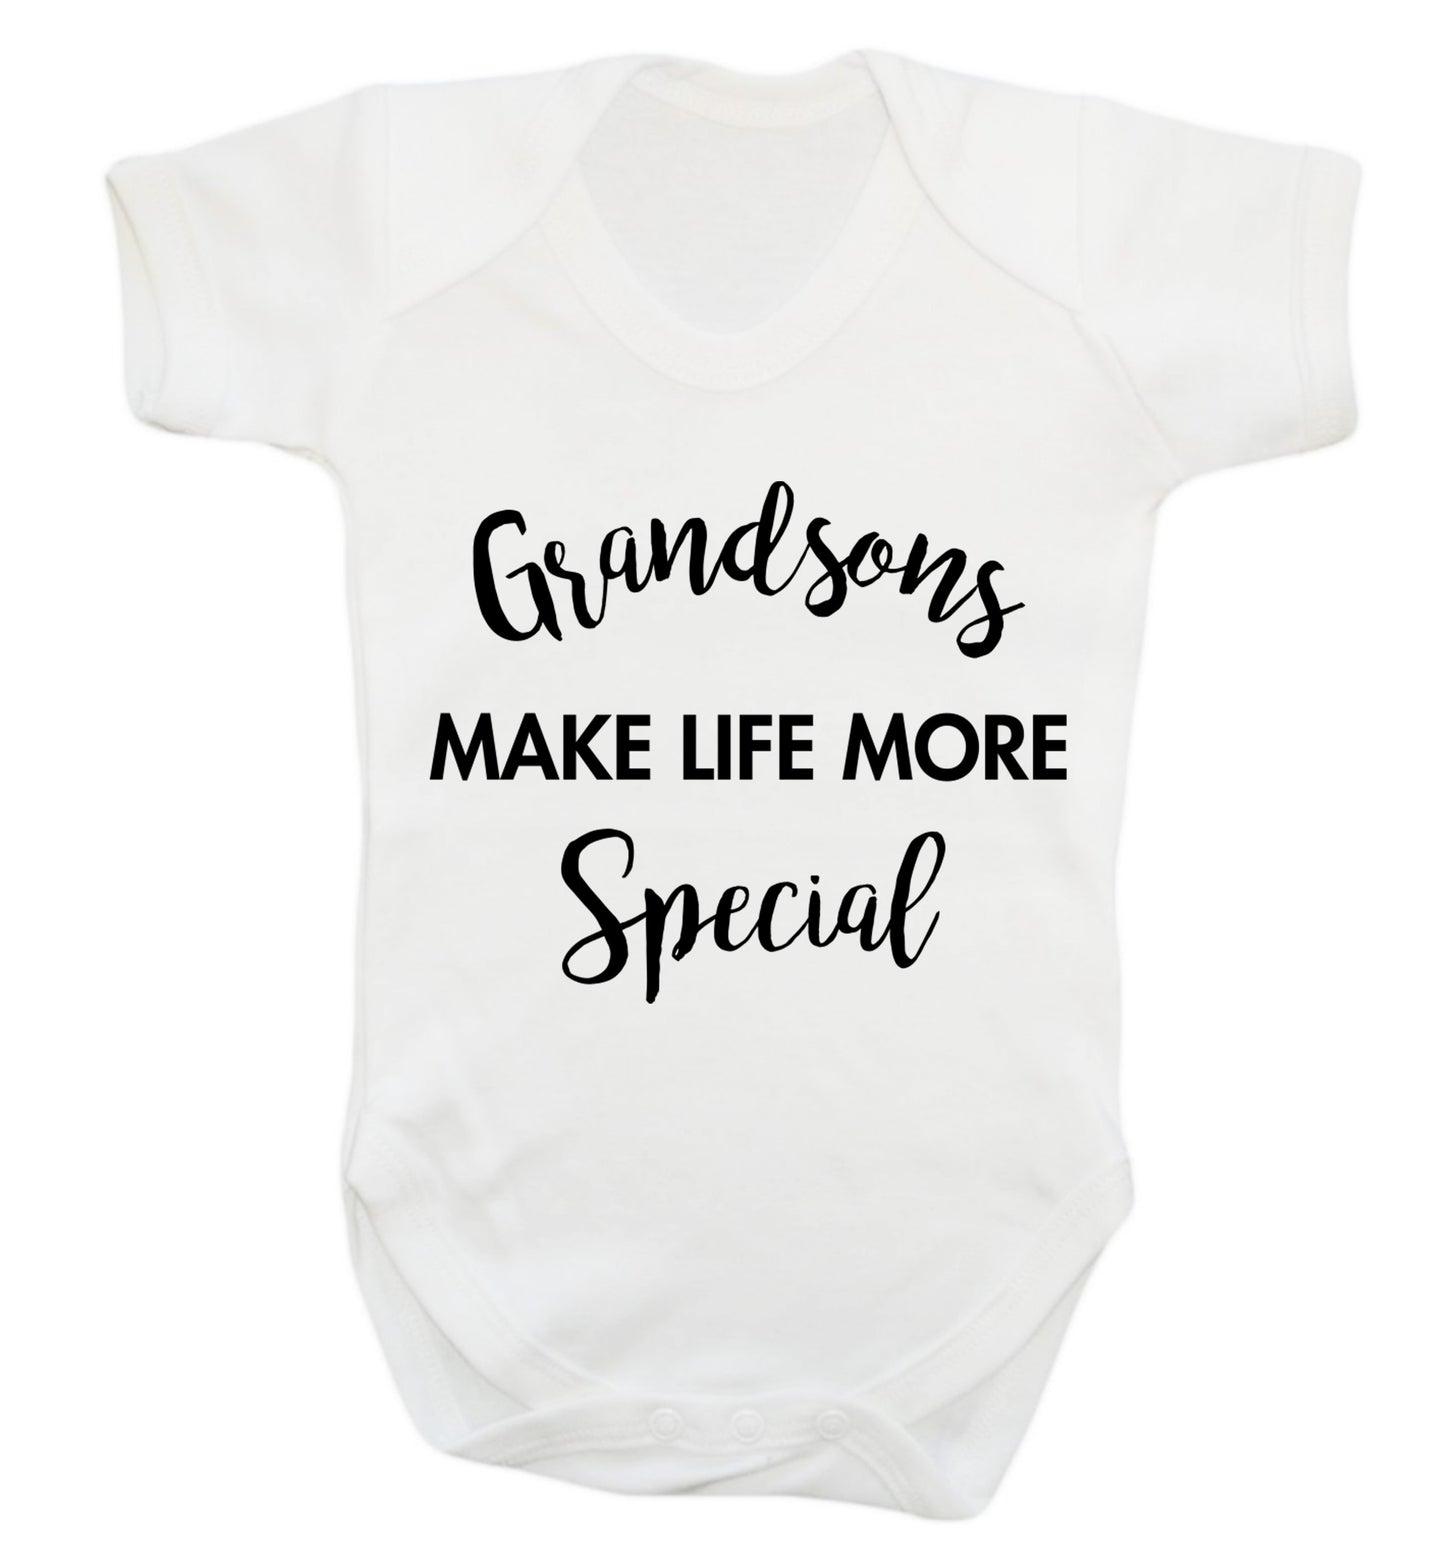 Grandsons make life more special Baby Vest white 18-24 months